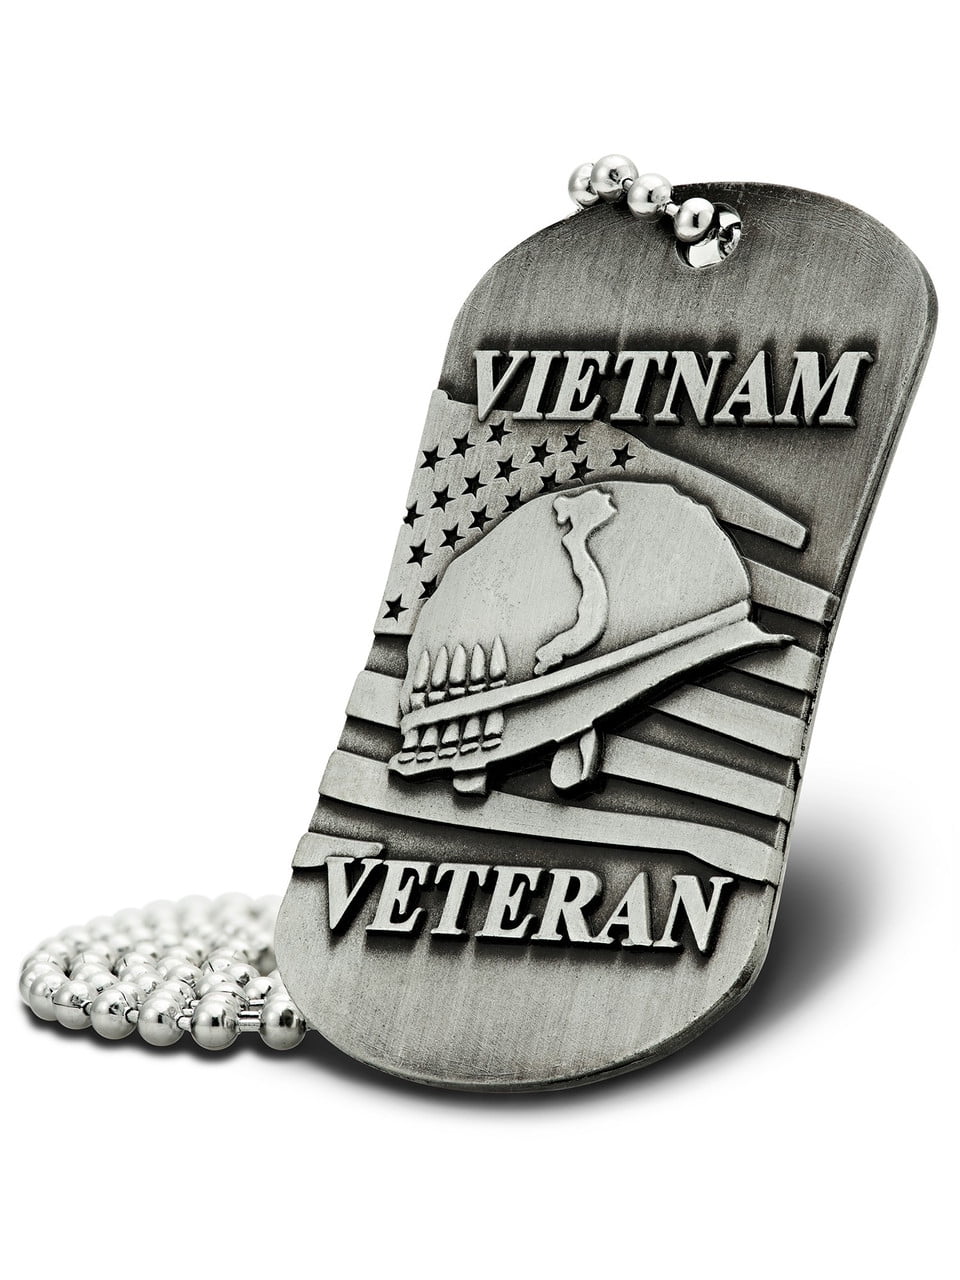 100 Stainless Steel Military Army Dog Tags + 100 Nickle Plated 30